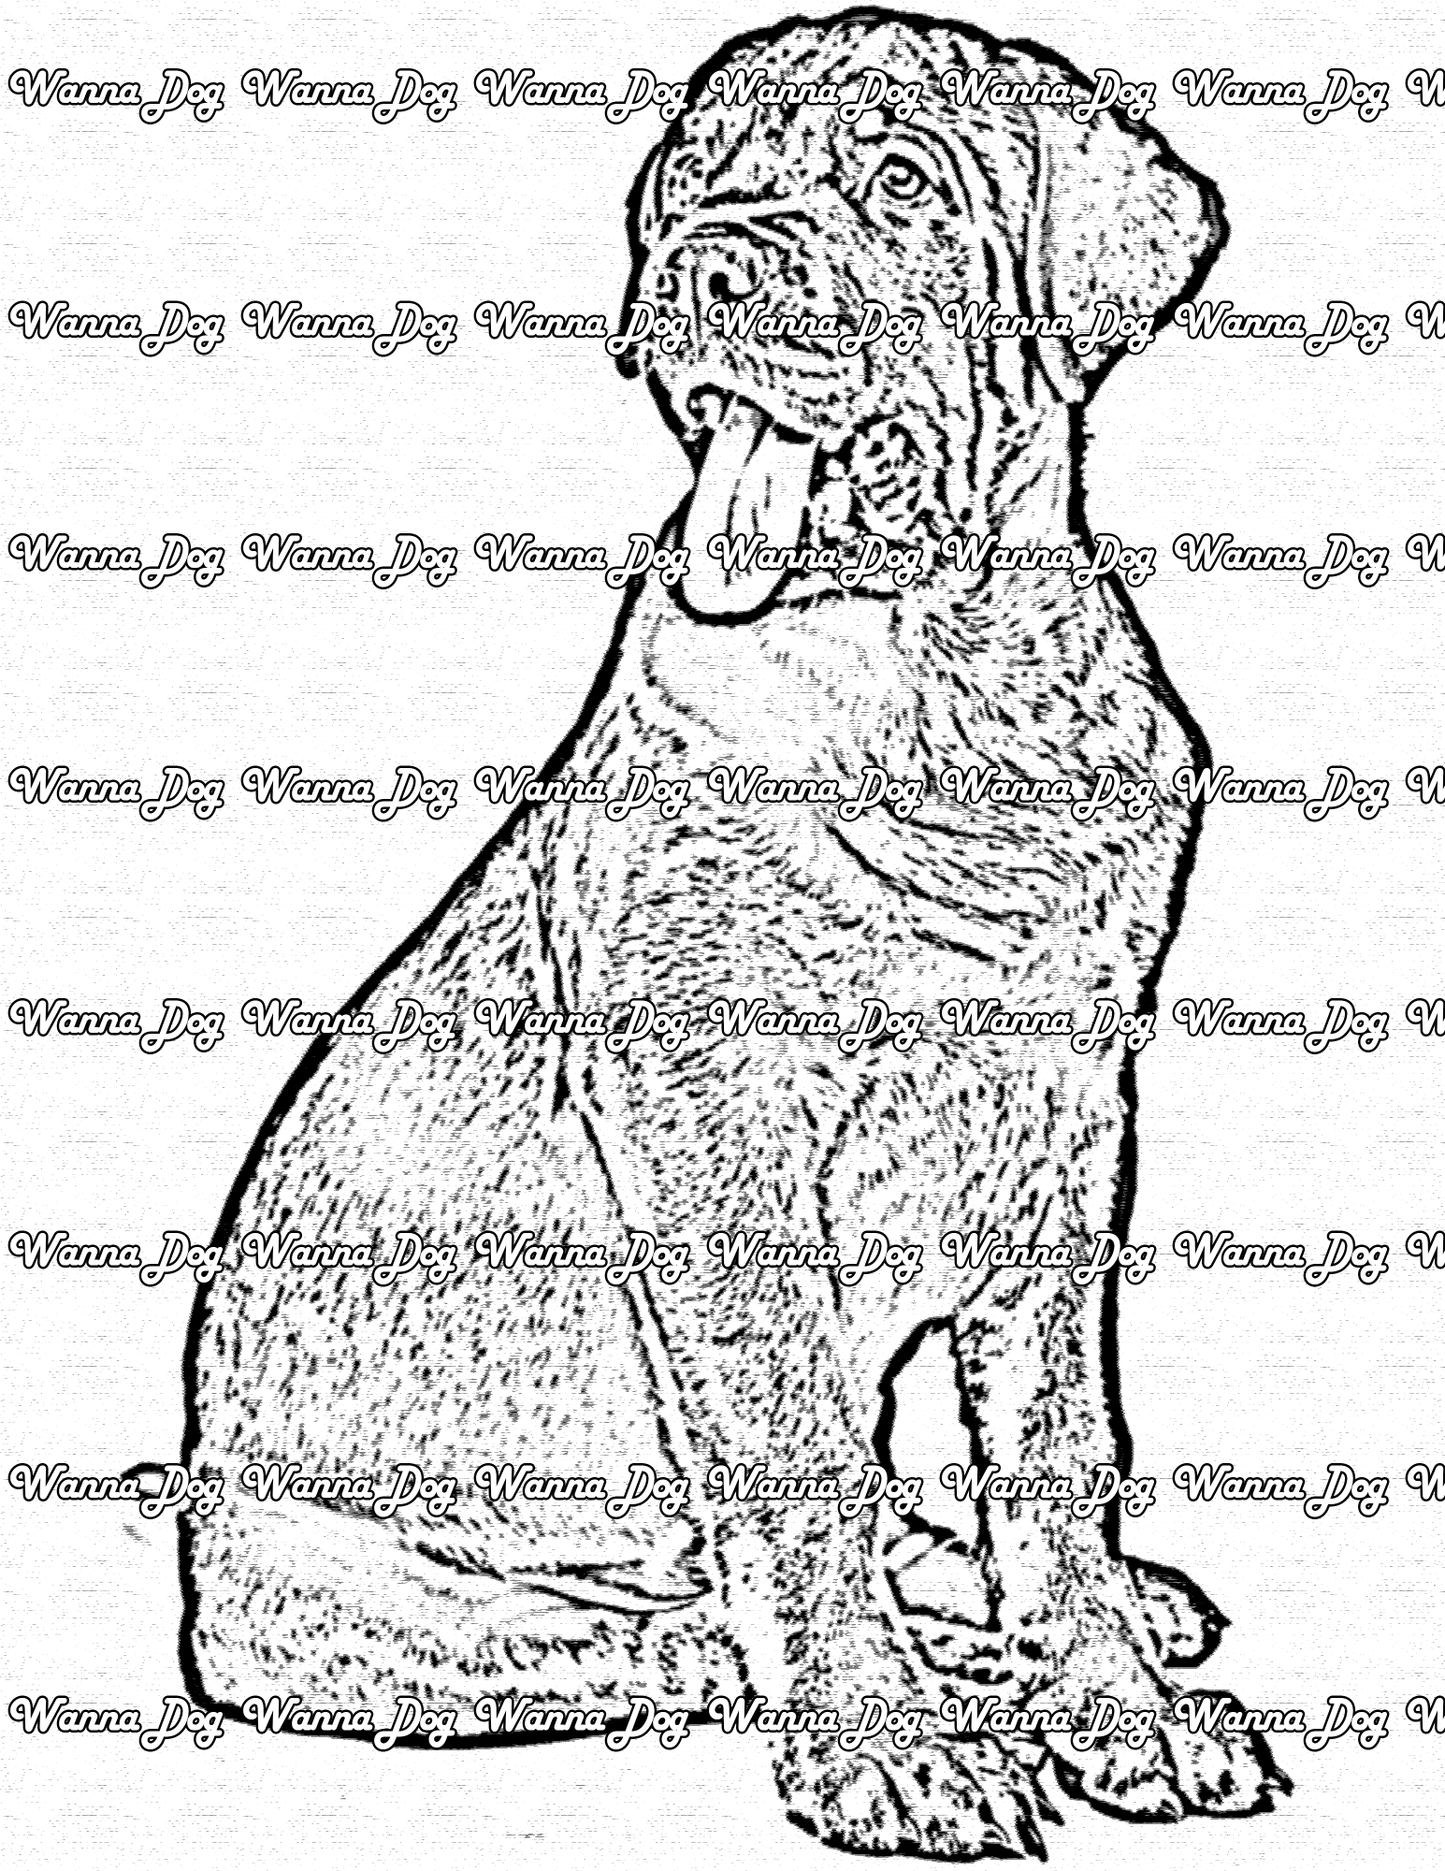 Rottweiler Coloring Page of a Rottweiler sitting, posing, with their tongue out